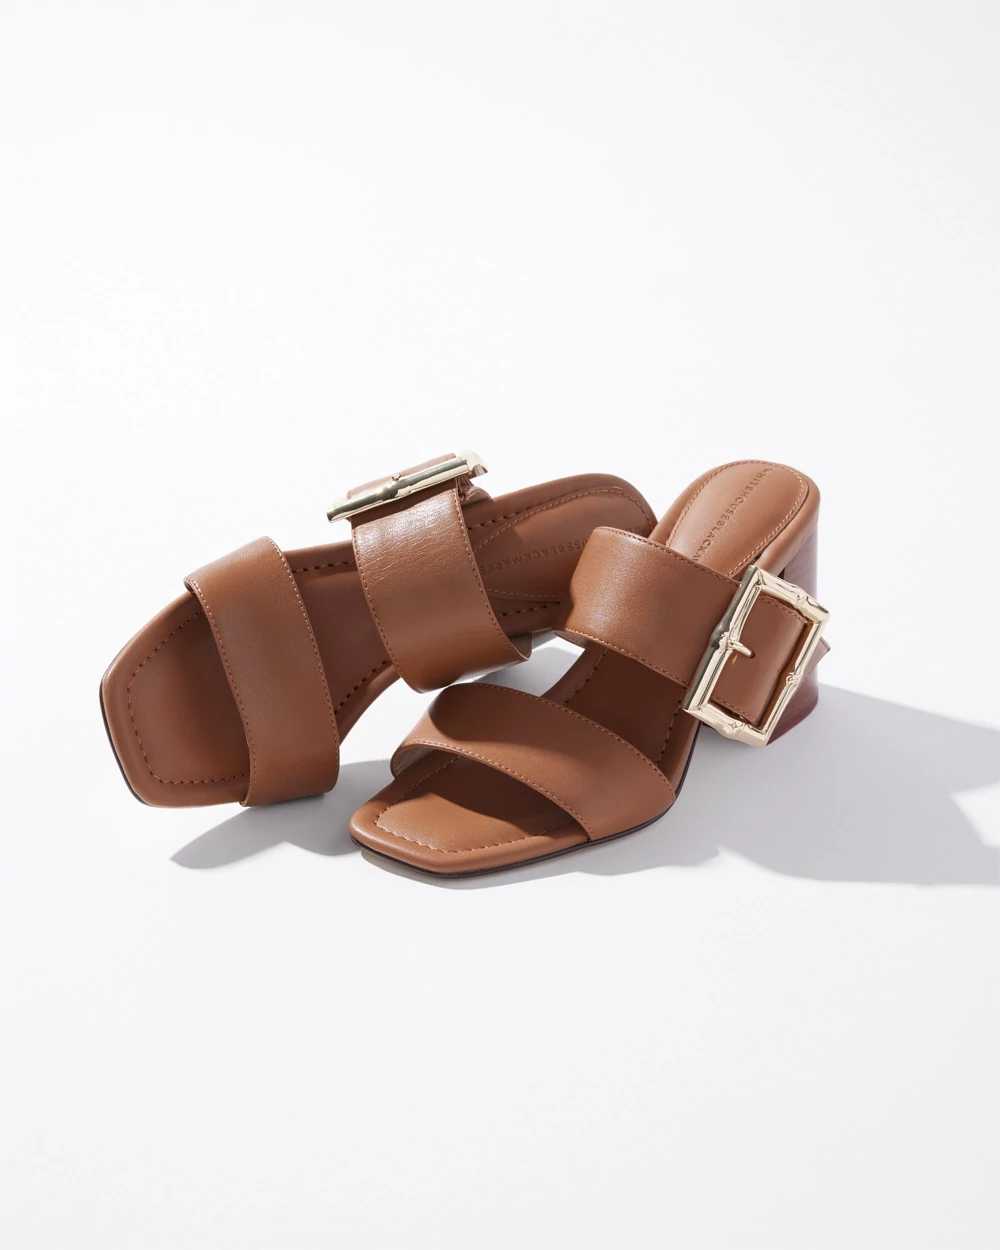 Bamboo Buckle Mid-Heel Sandal click to view larger image.